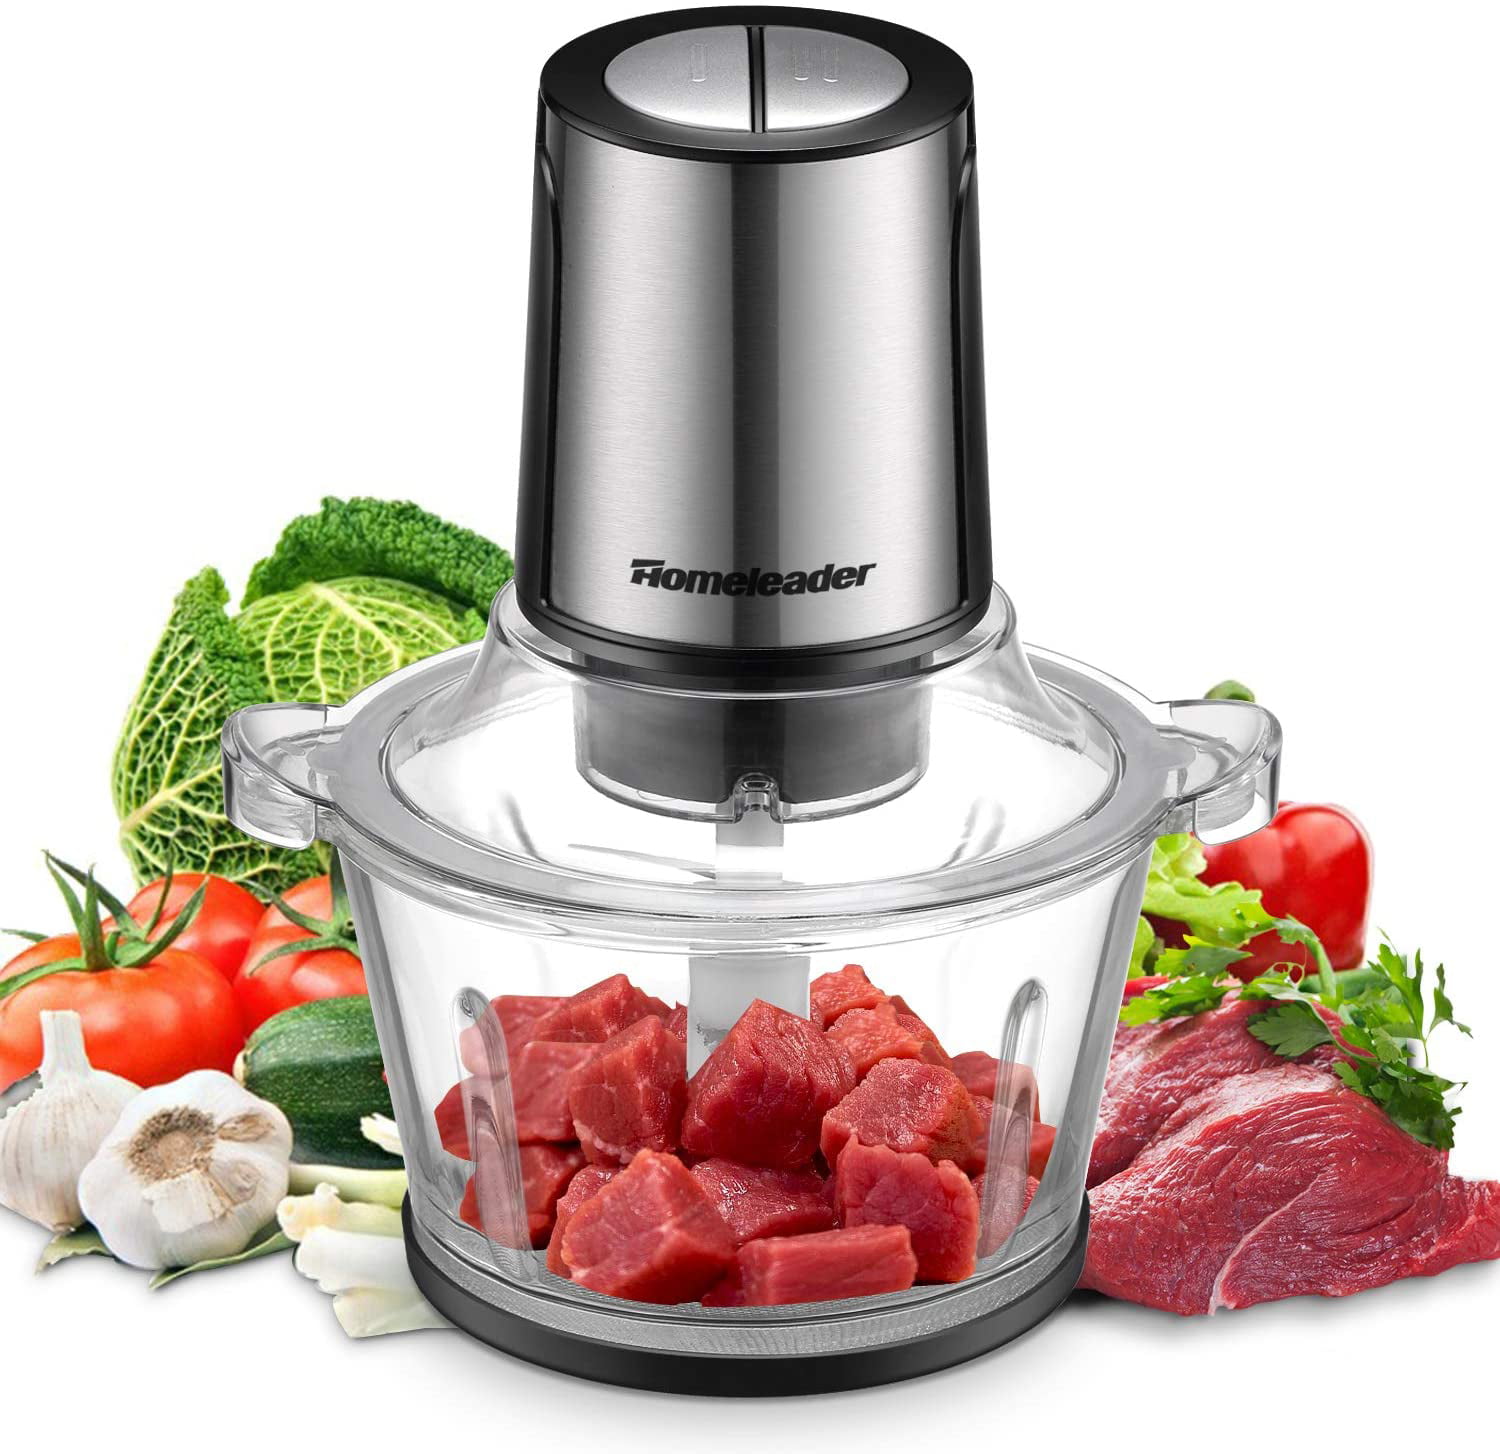 Homeleader Electric Chopper - Blender and Food Processor Combo, 3 in 1 Food  Grinder for Coffee, Meat, Vegetables, Fruits, Coffee, 8 Cup Glass Bowl